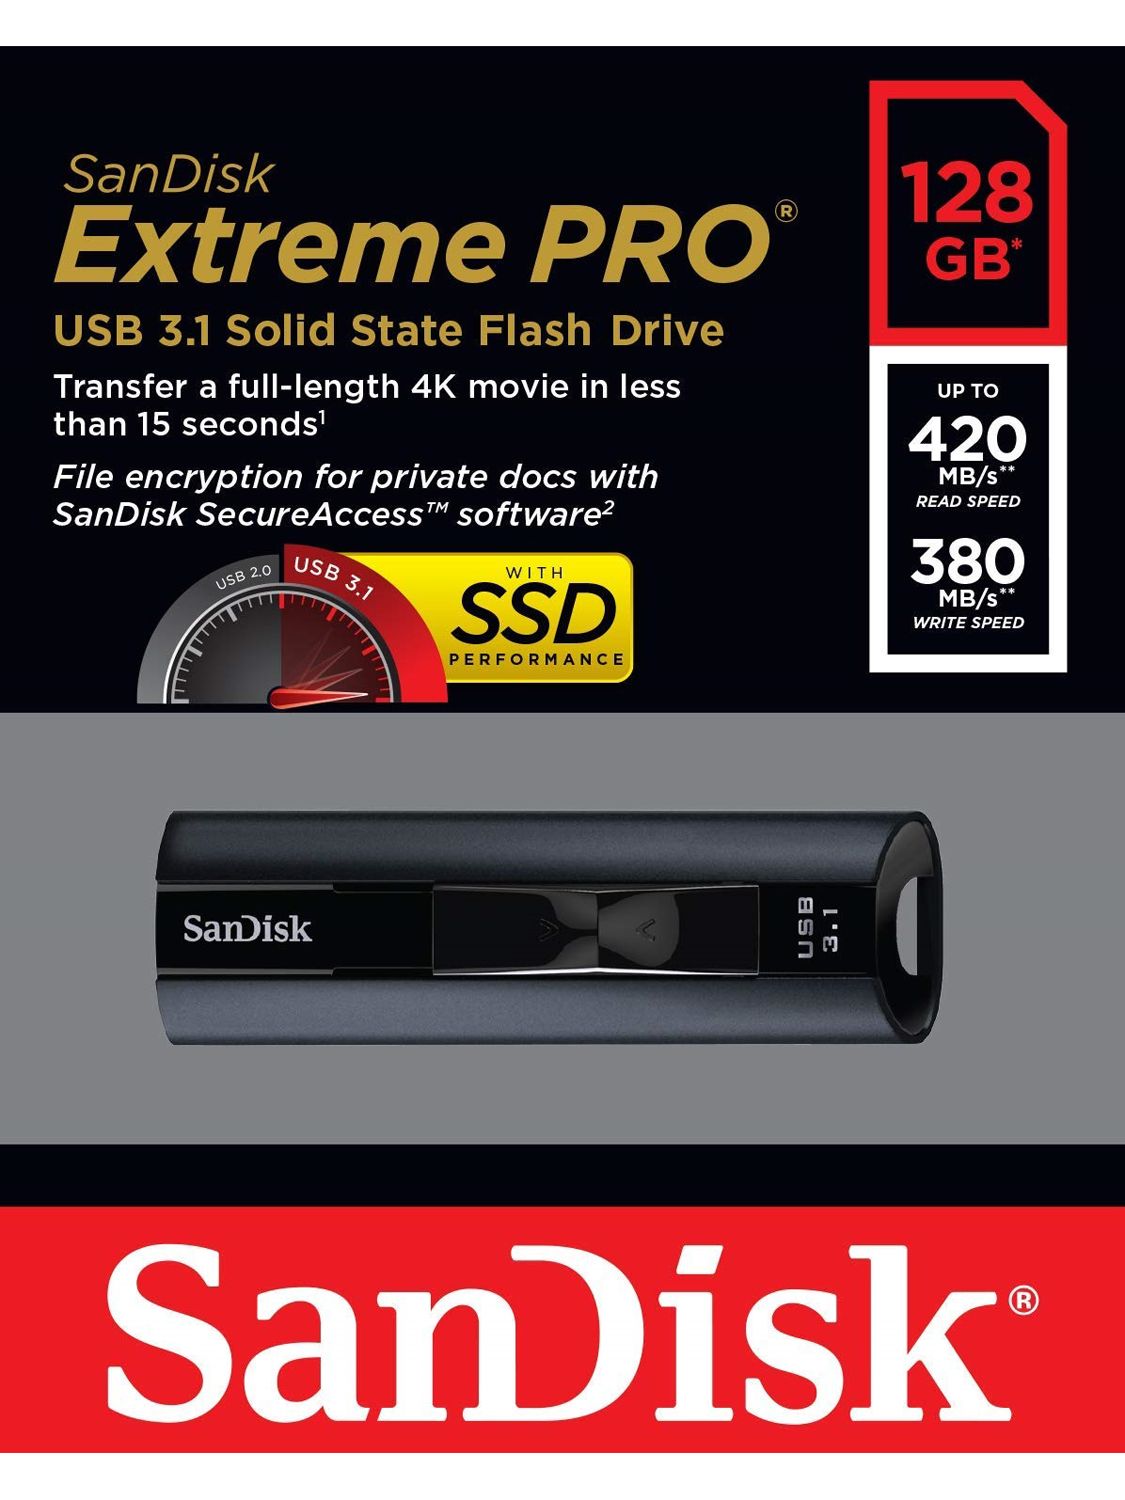 SanDisk Extreme Pro USB 3.1 Solid State Portable Flash Drive, 128GB